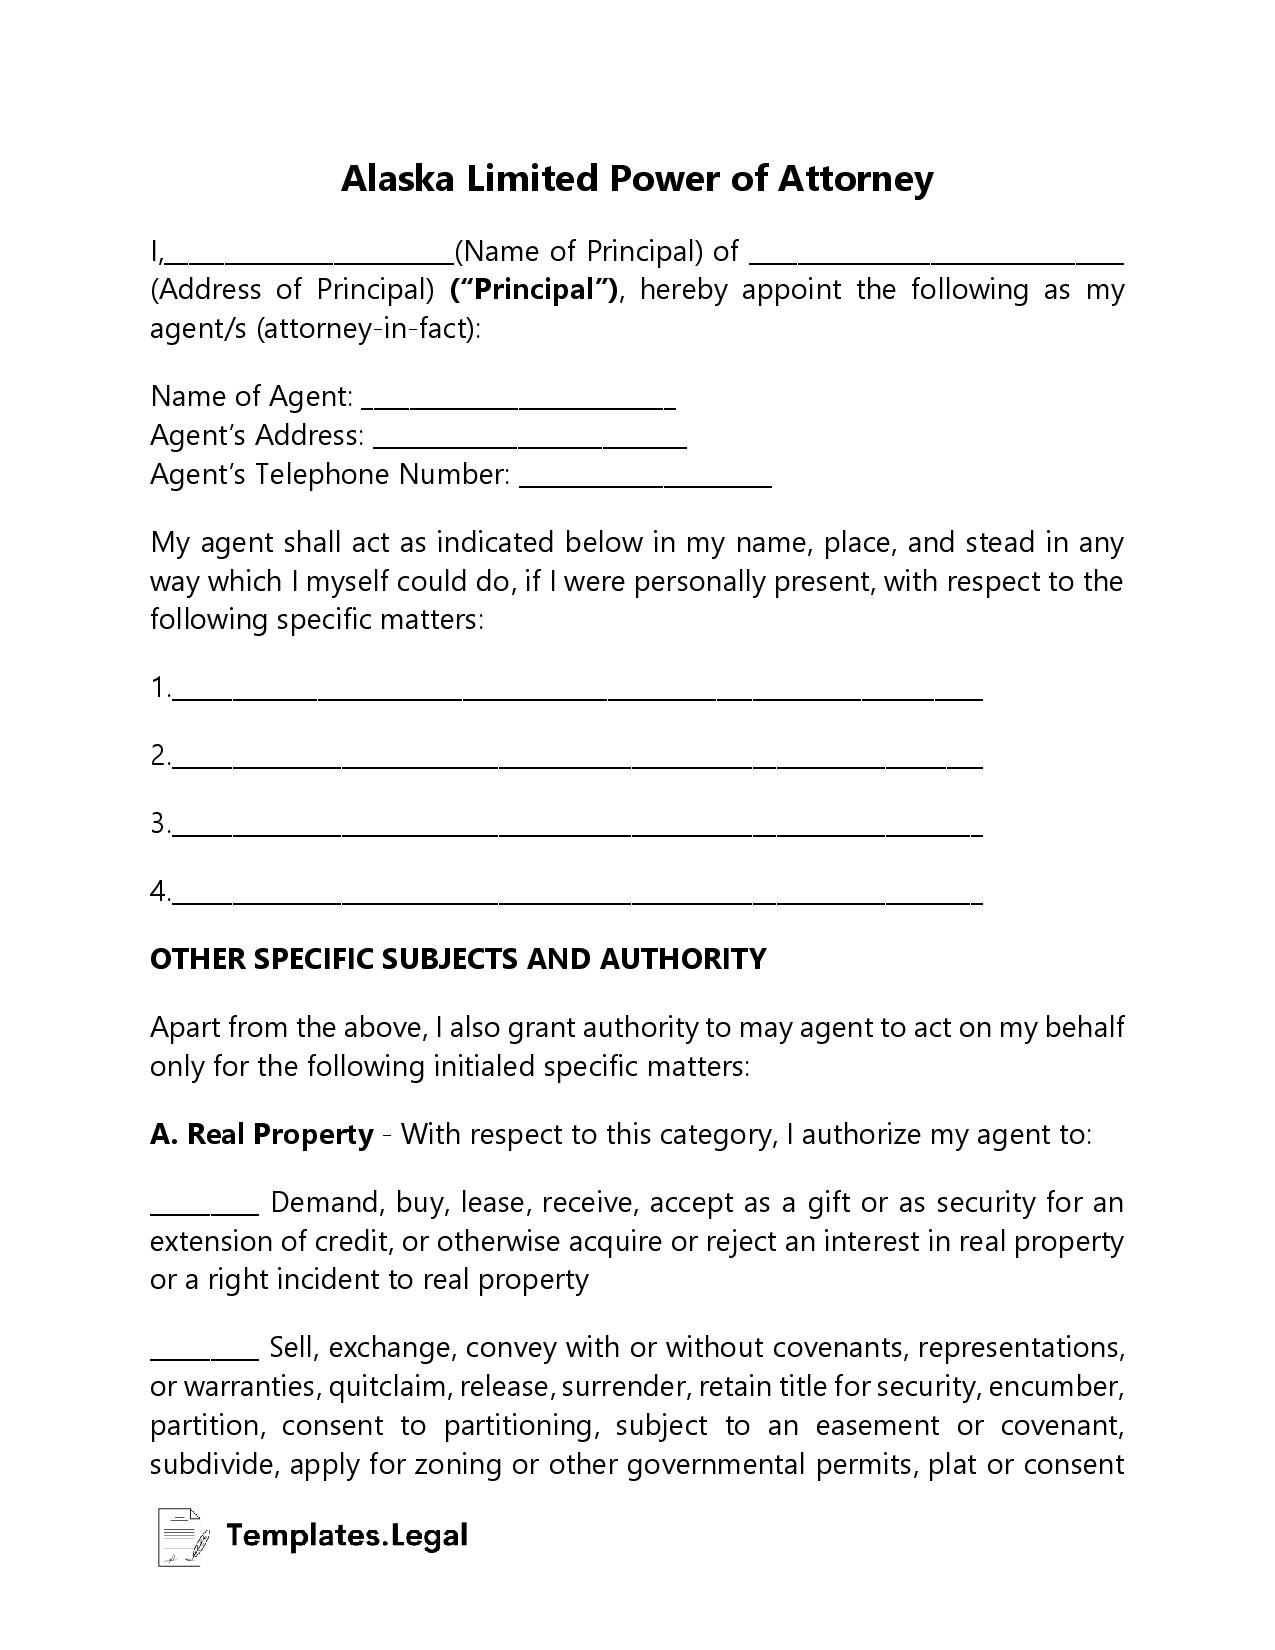 Alaska Limited Power of Attorney - Templates.Legal